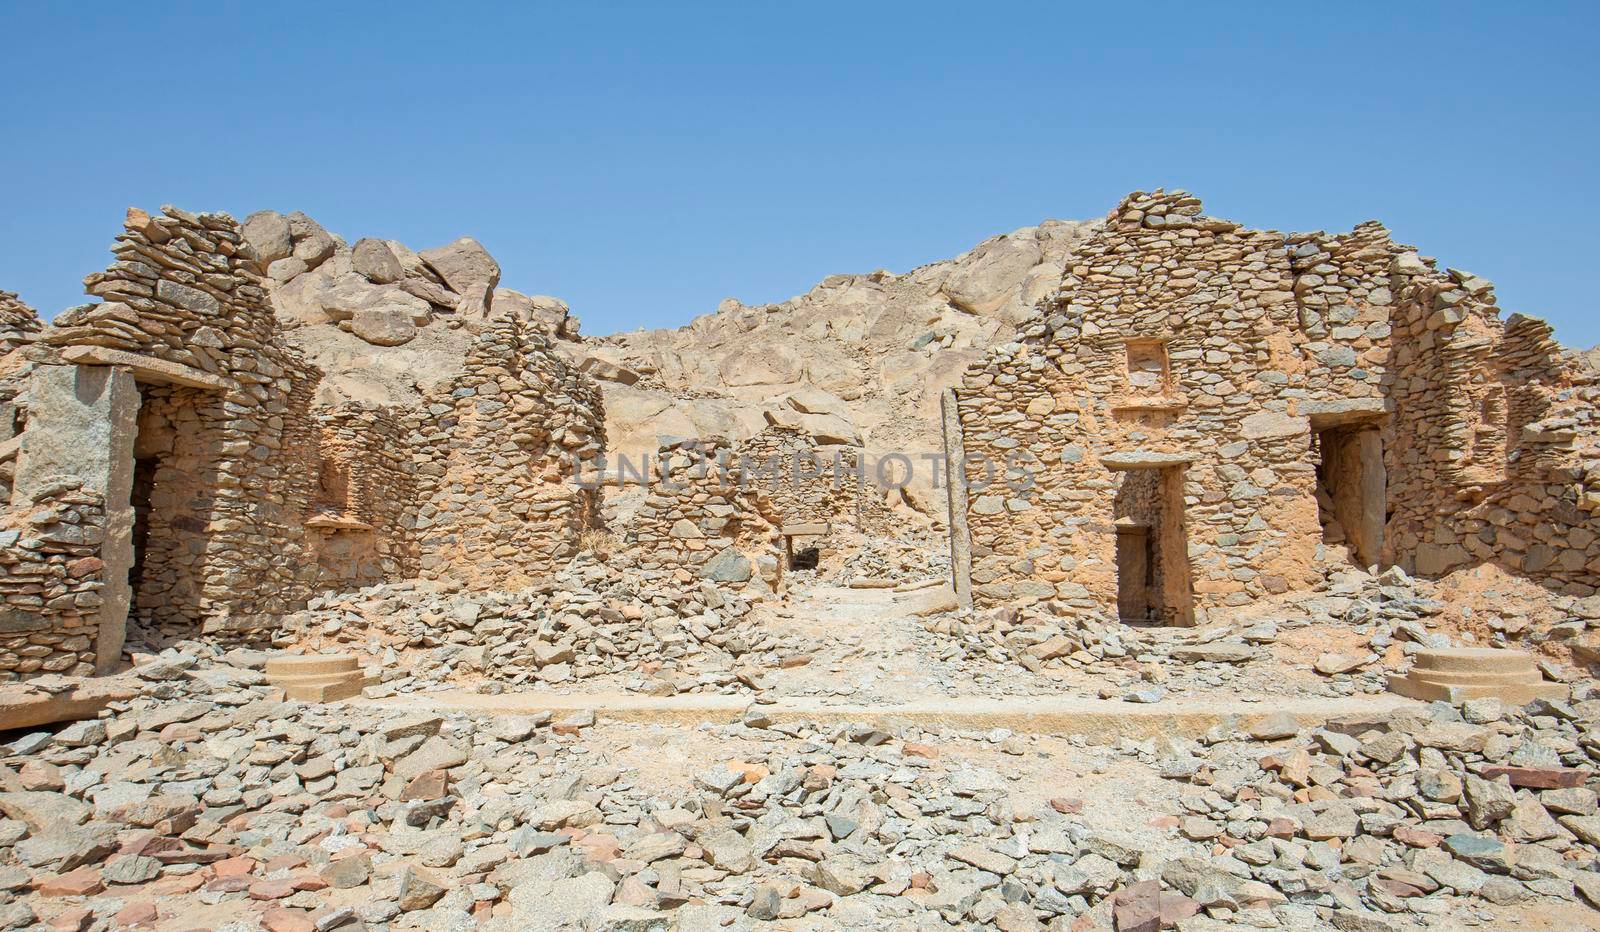 View across old abandoned ruins of Roman quarry town buildings at Mons Claudianus in Egyptian eastern desert